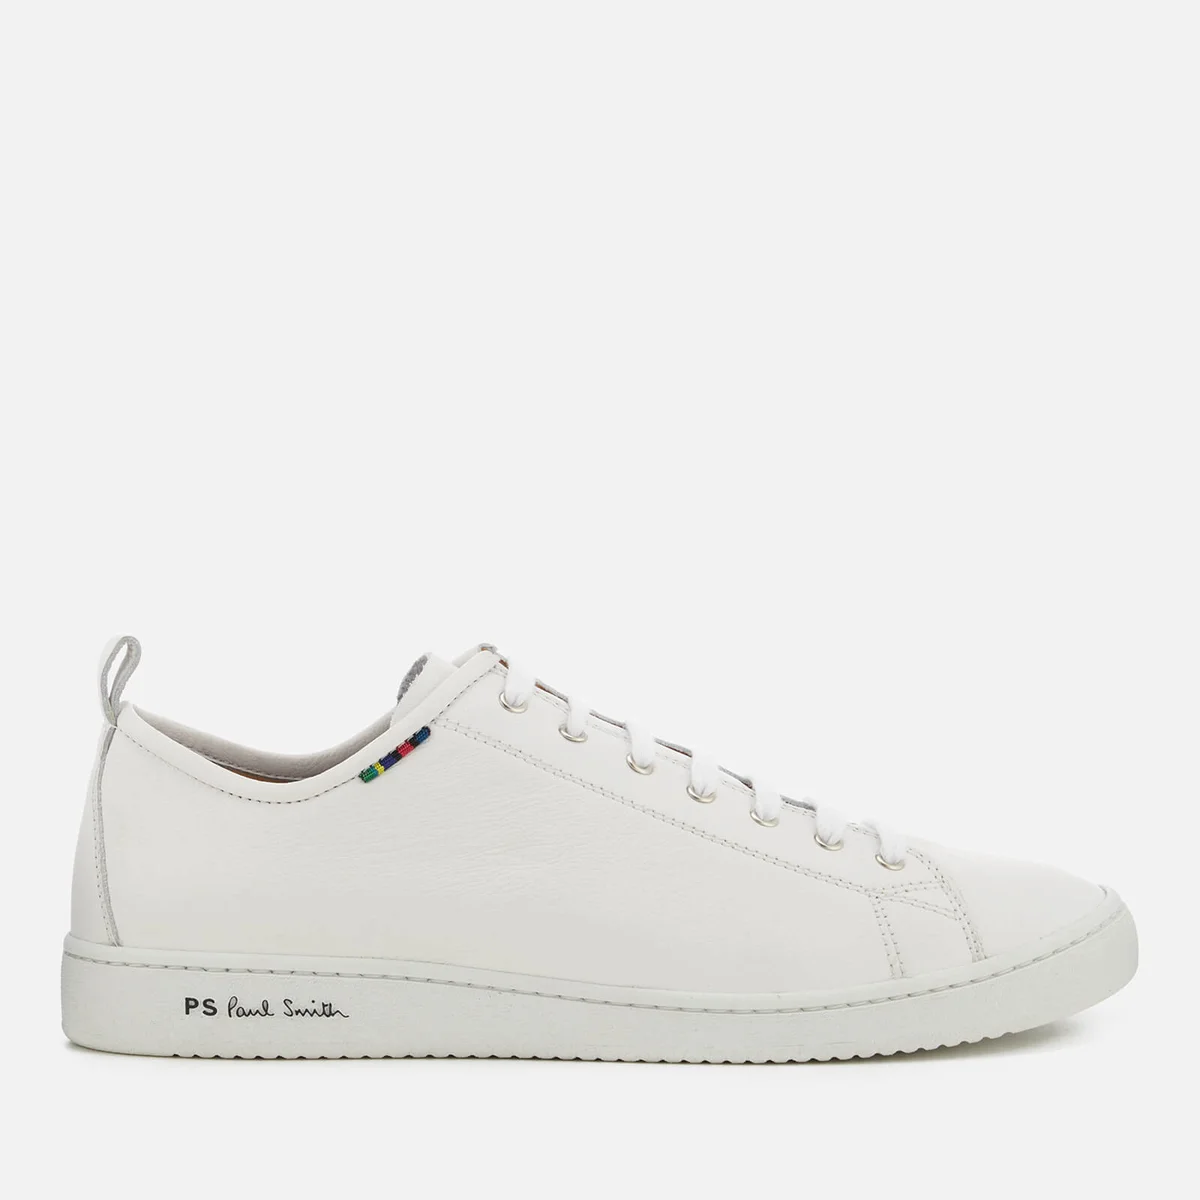 PS Paul Smith Men's Miyata Leather Low Top Trainers - White Image 1